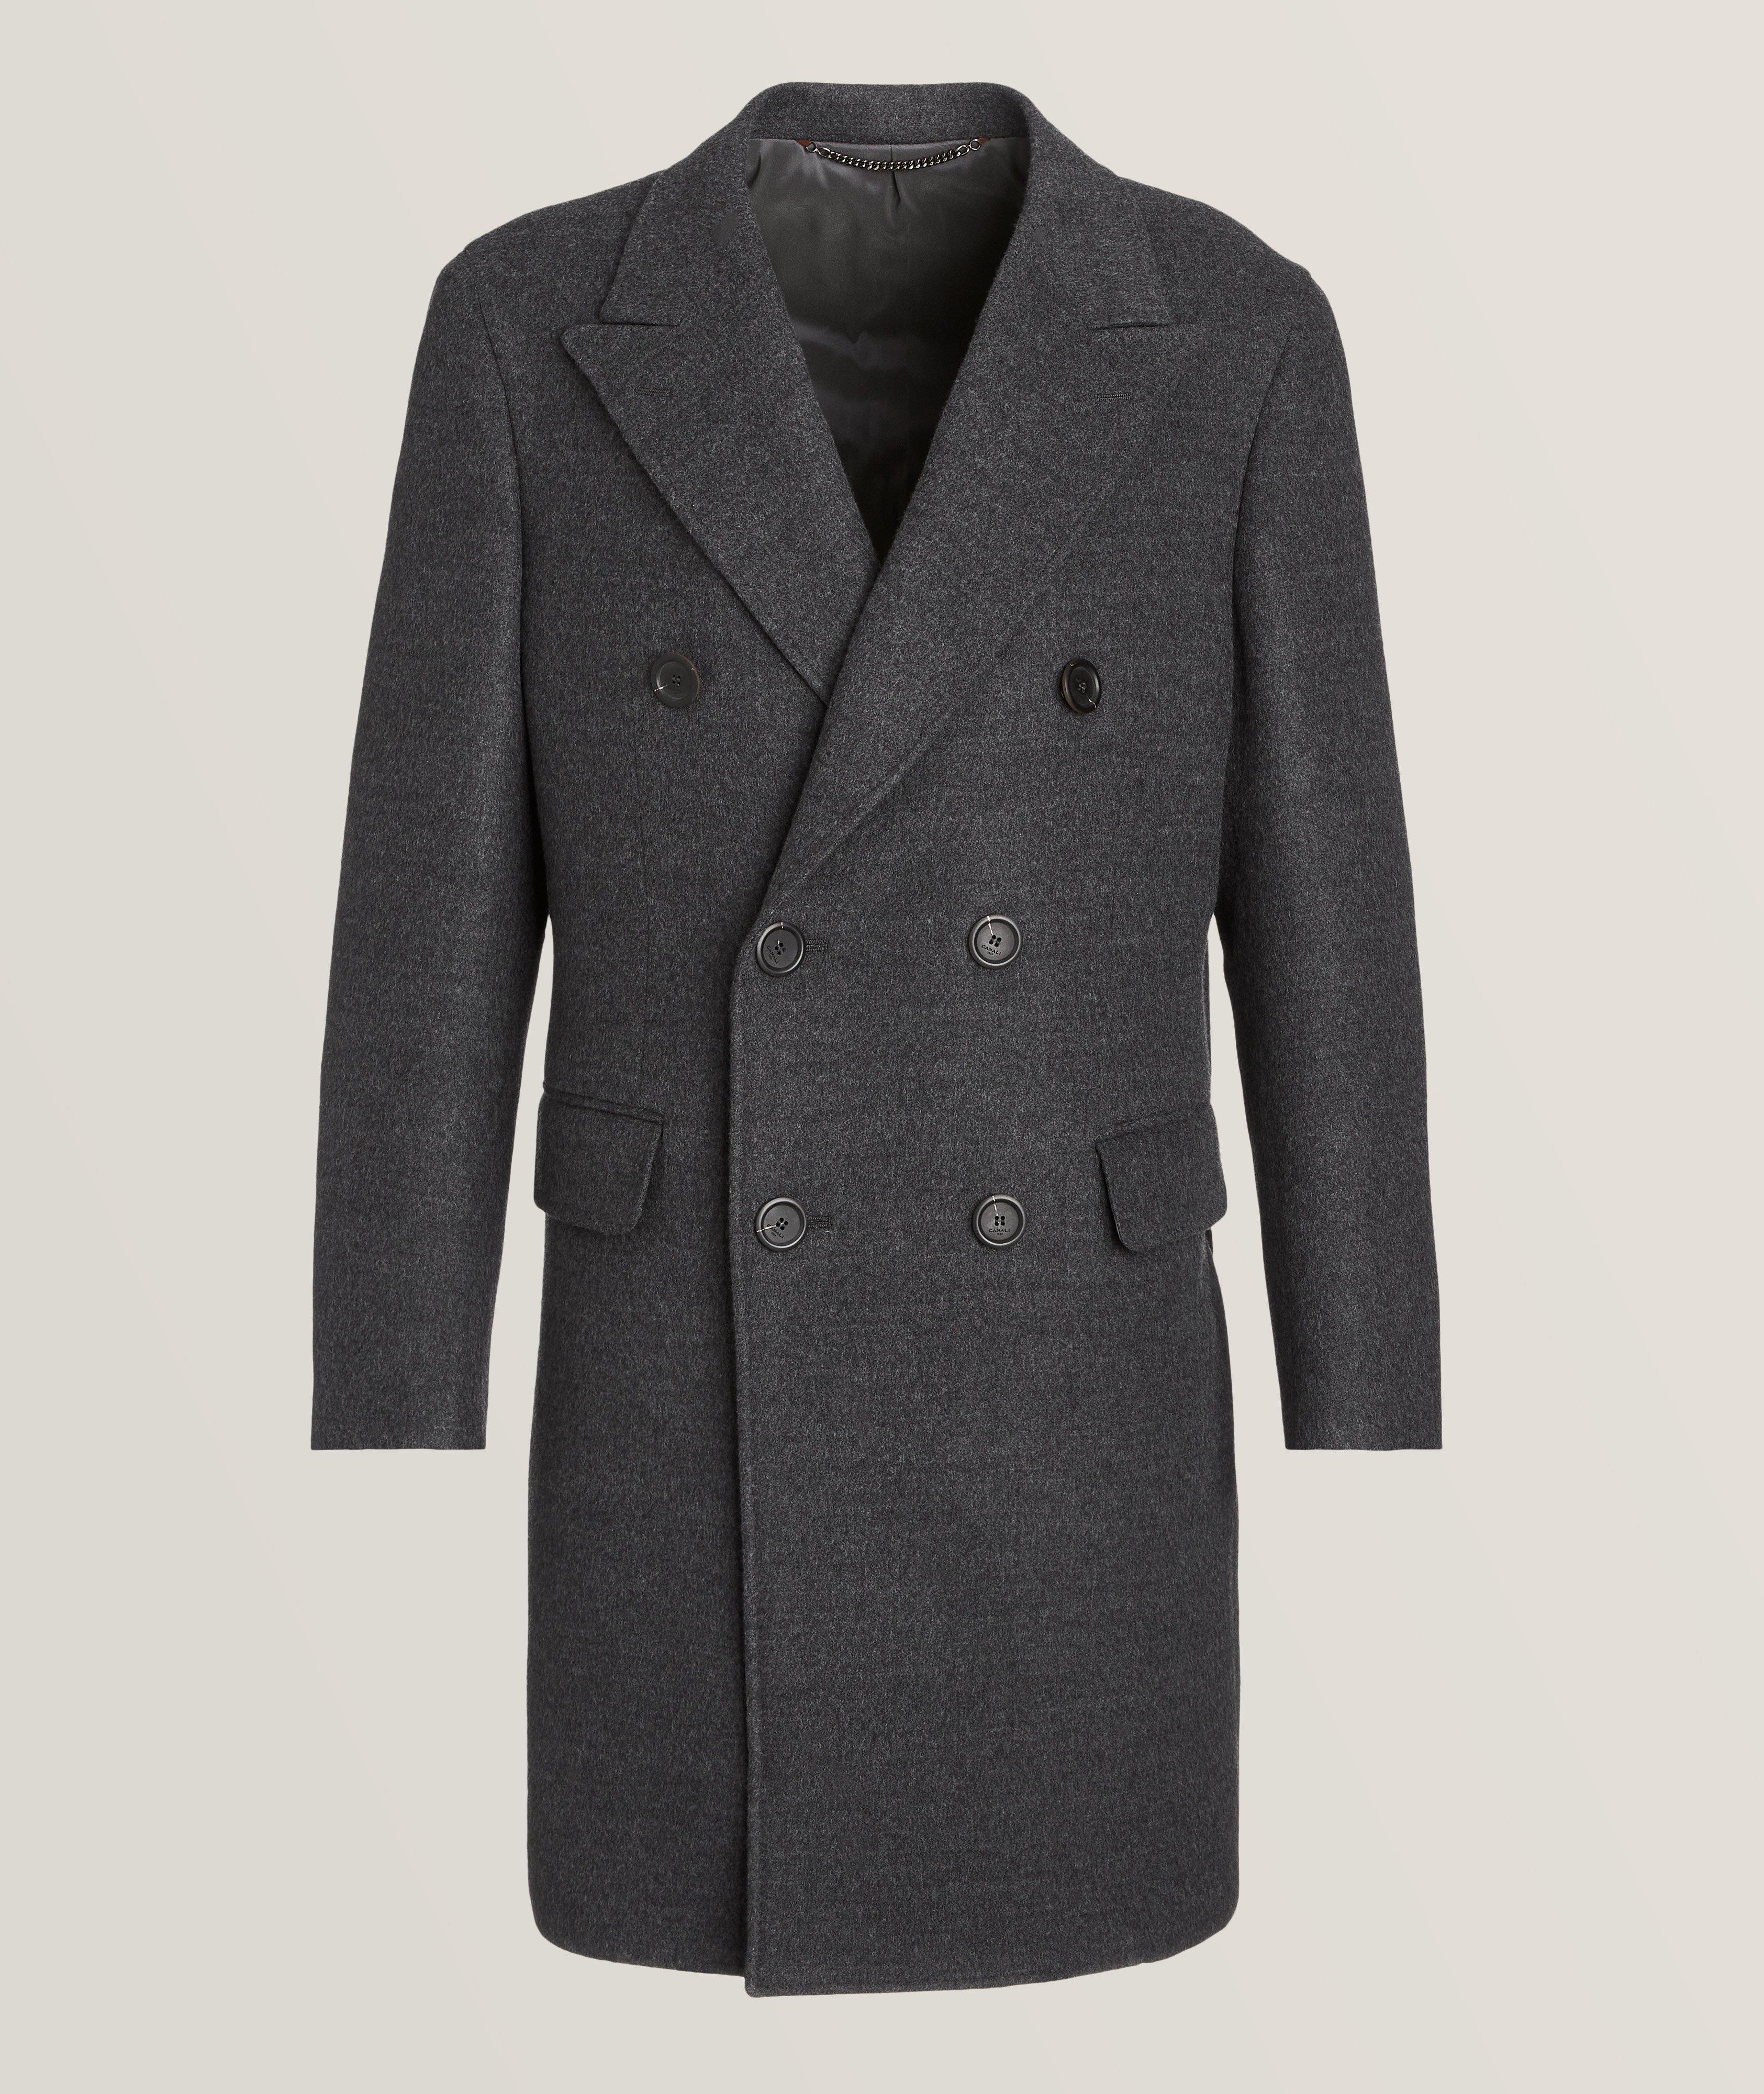 Double Face Overcoat image 0